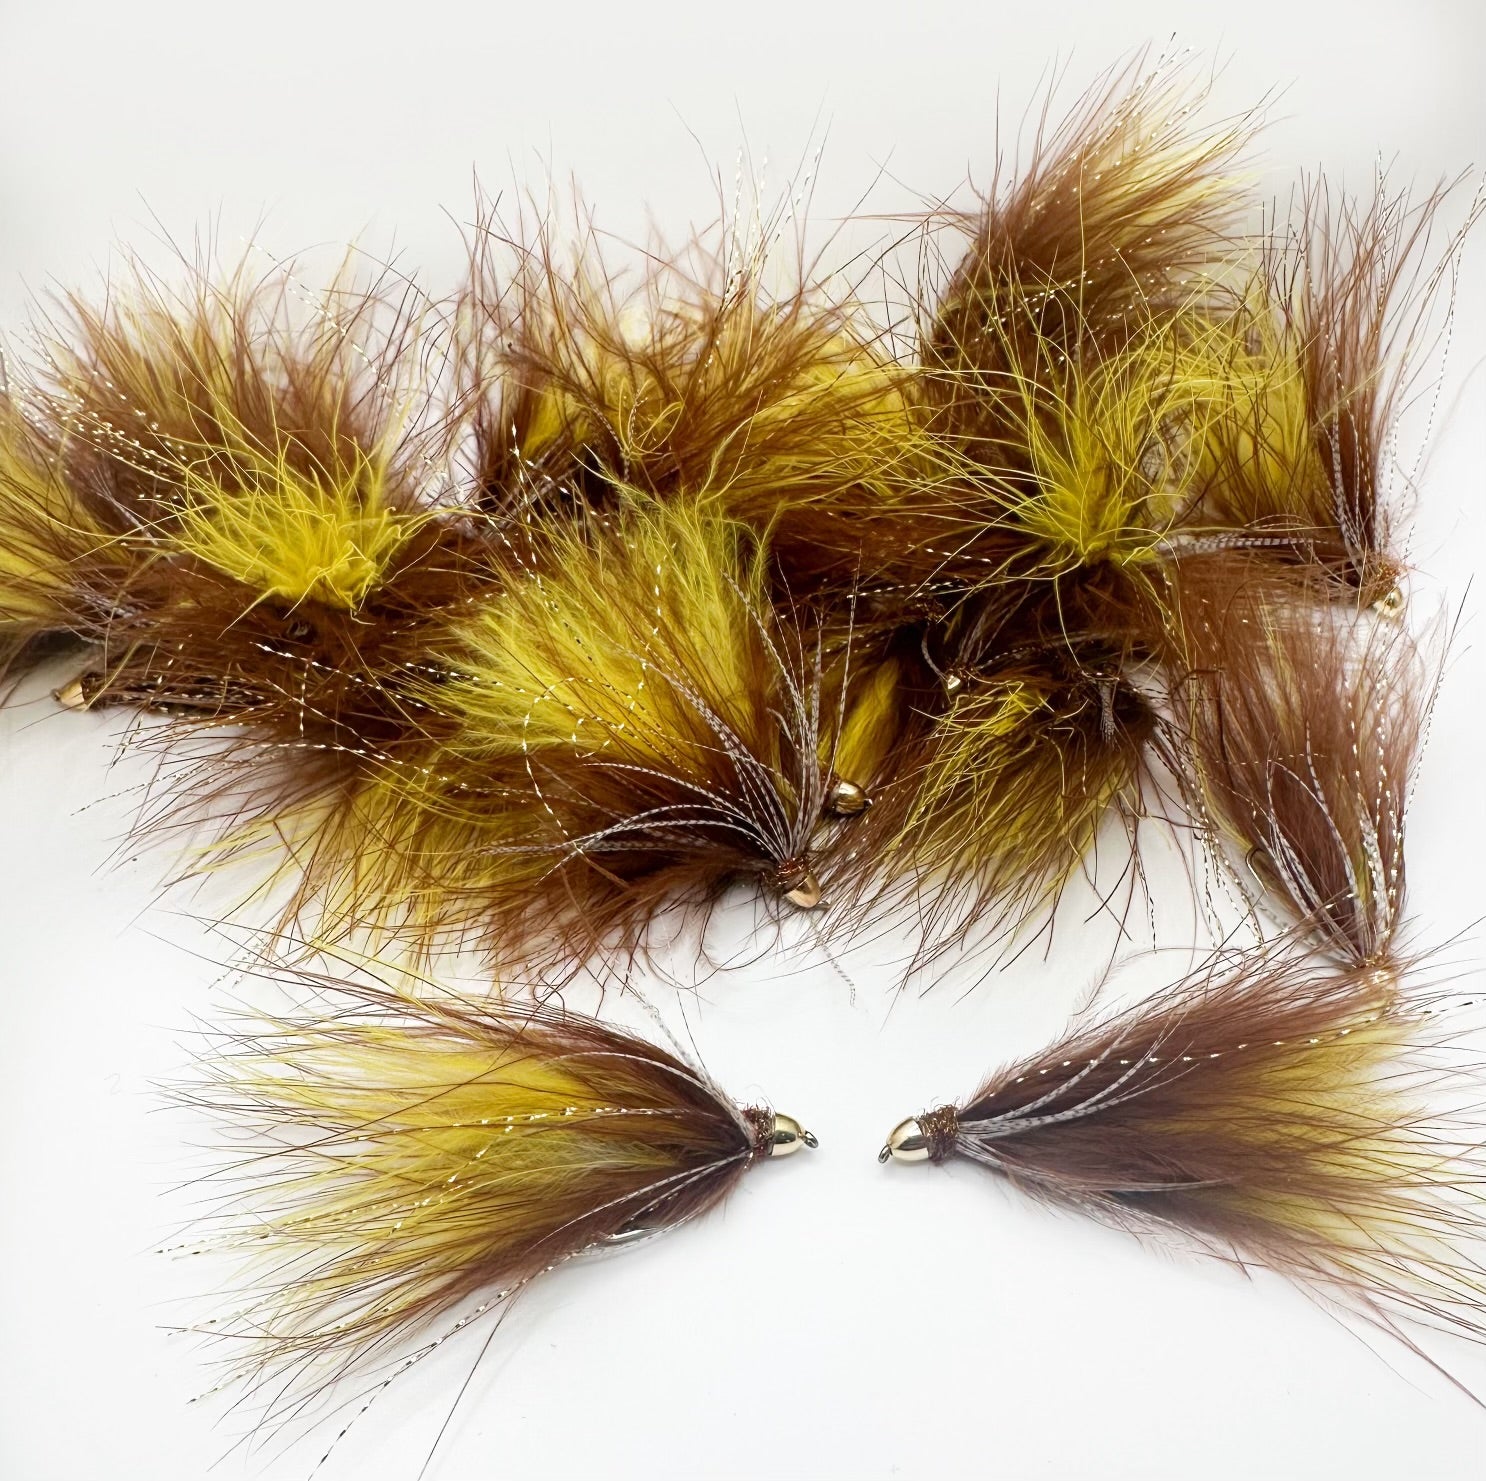 Cone Head Soft Hackle Streamer Brown/Yellow – North Country Fly Shop